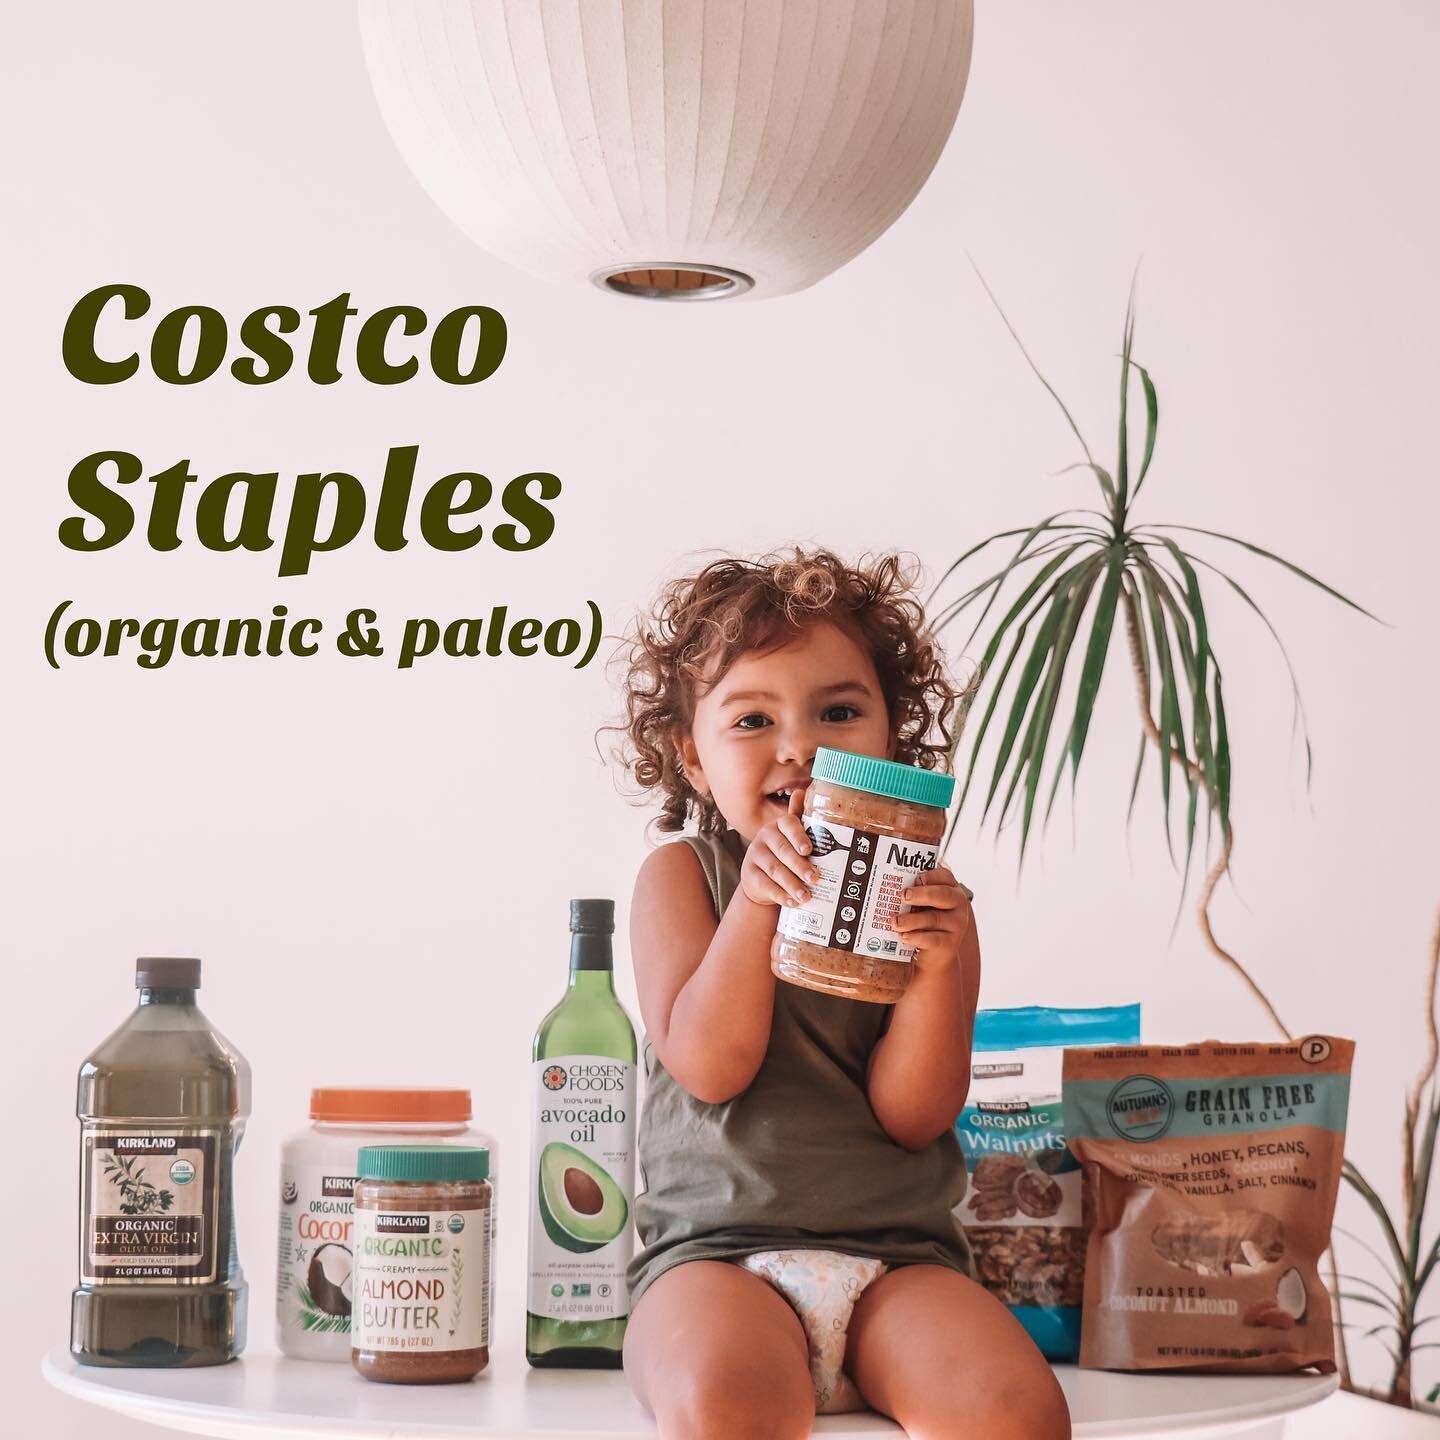 We love Costco and the organic/paleo offerings keep getting better and better. Here are some of our Costco staples (*organic). What would you add to the list?